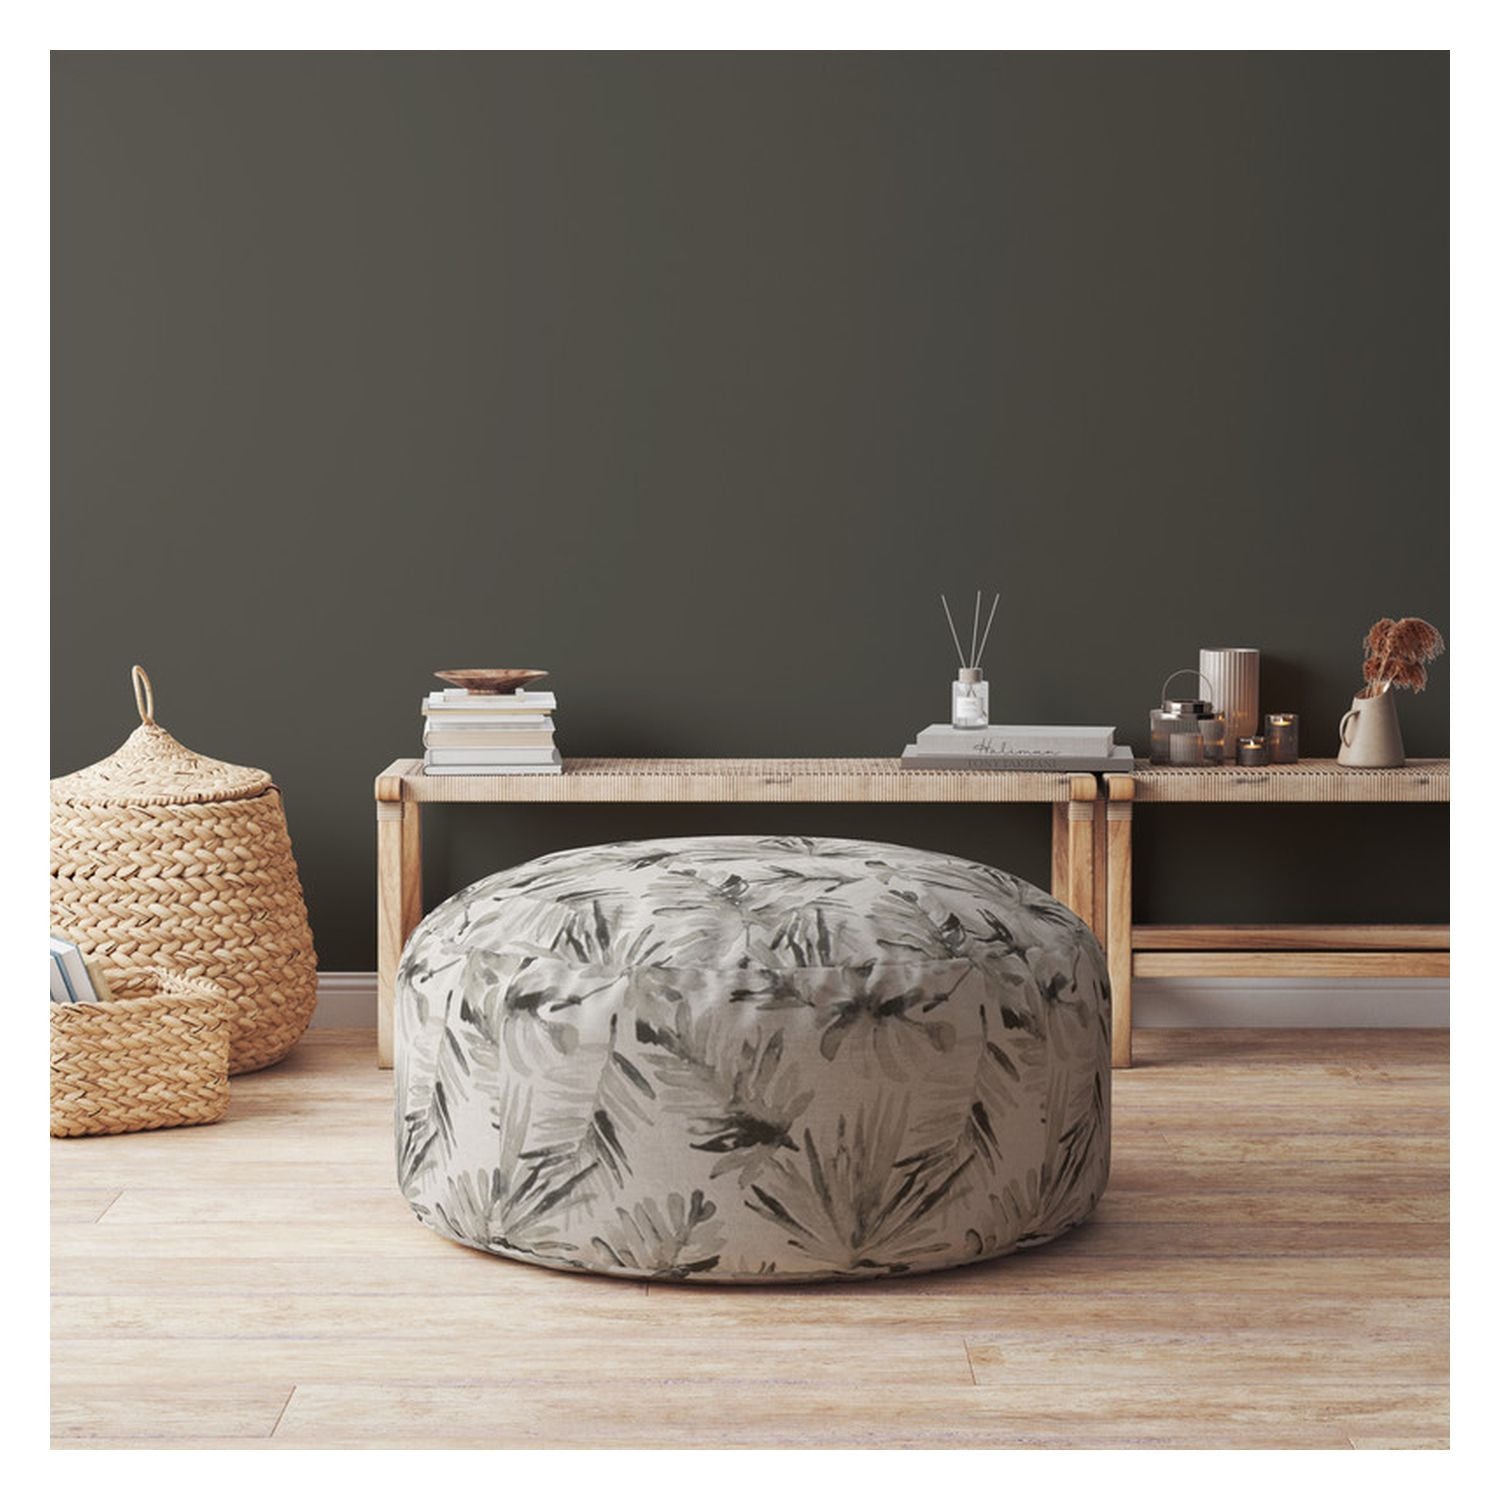 24" Beige Flax Round Floral Pouf Cover